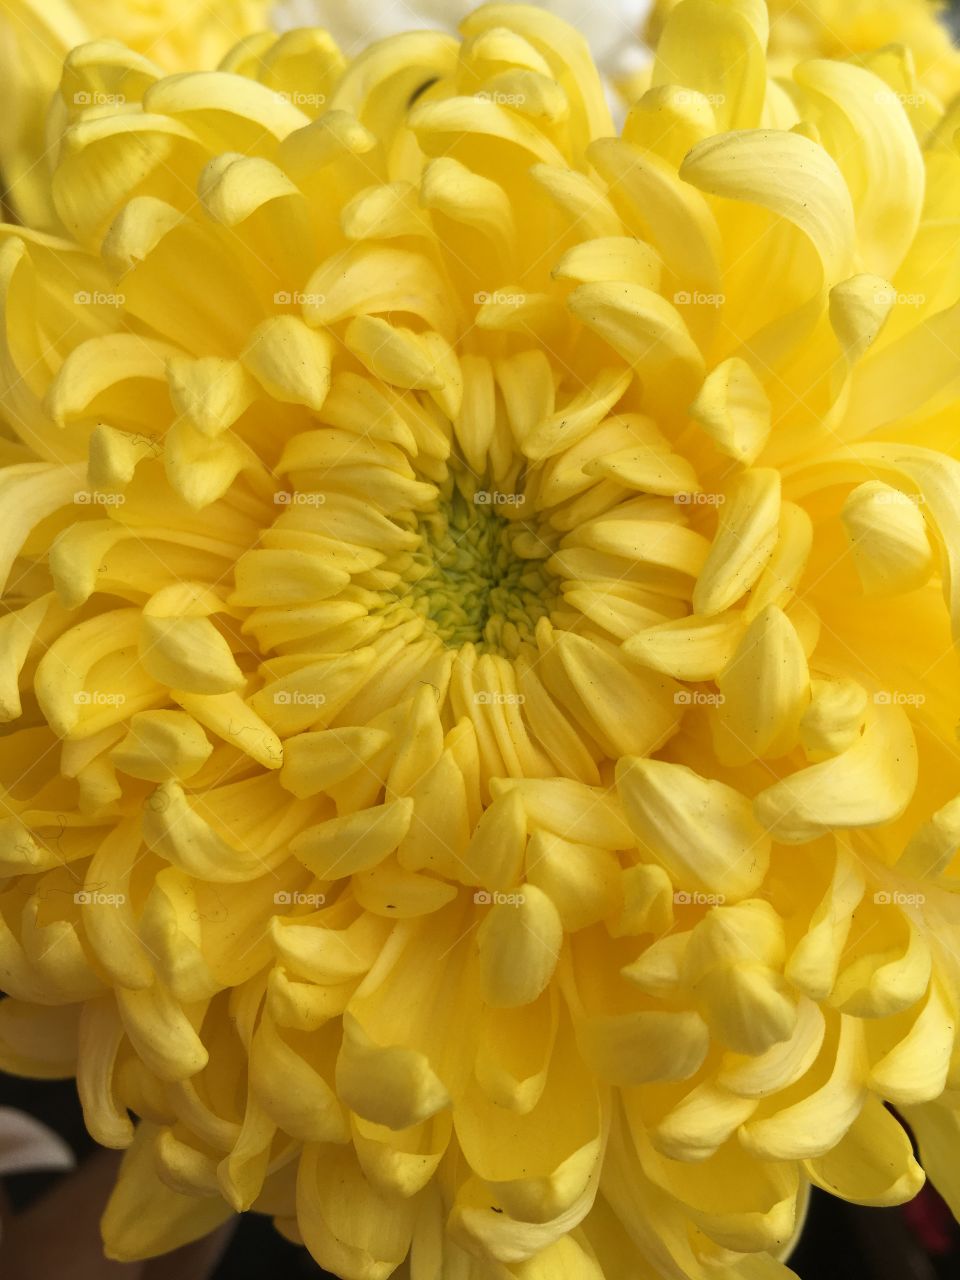 Close up of yellow flower with many small petals